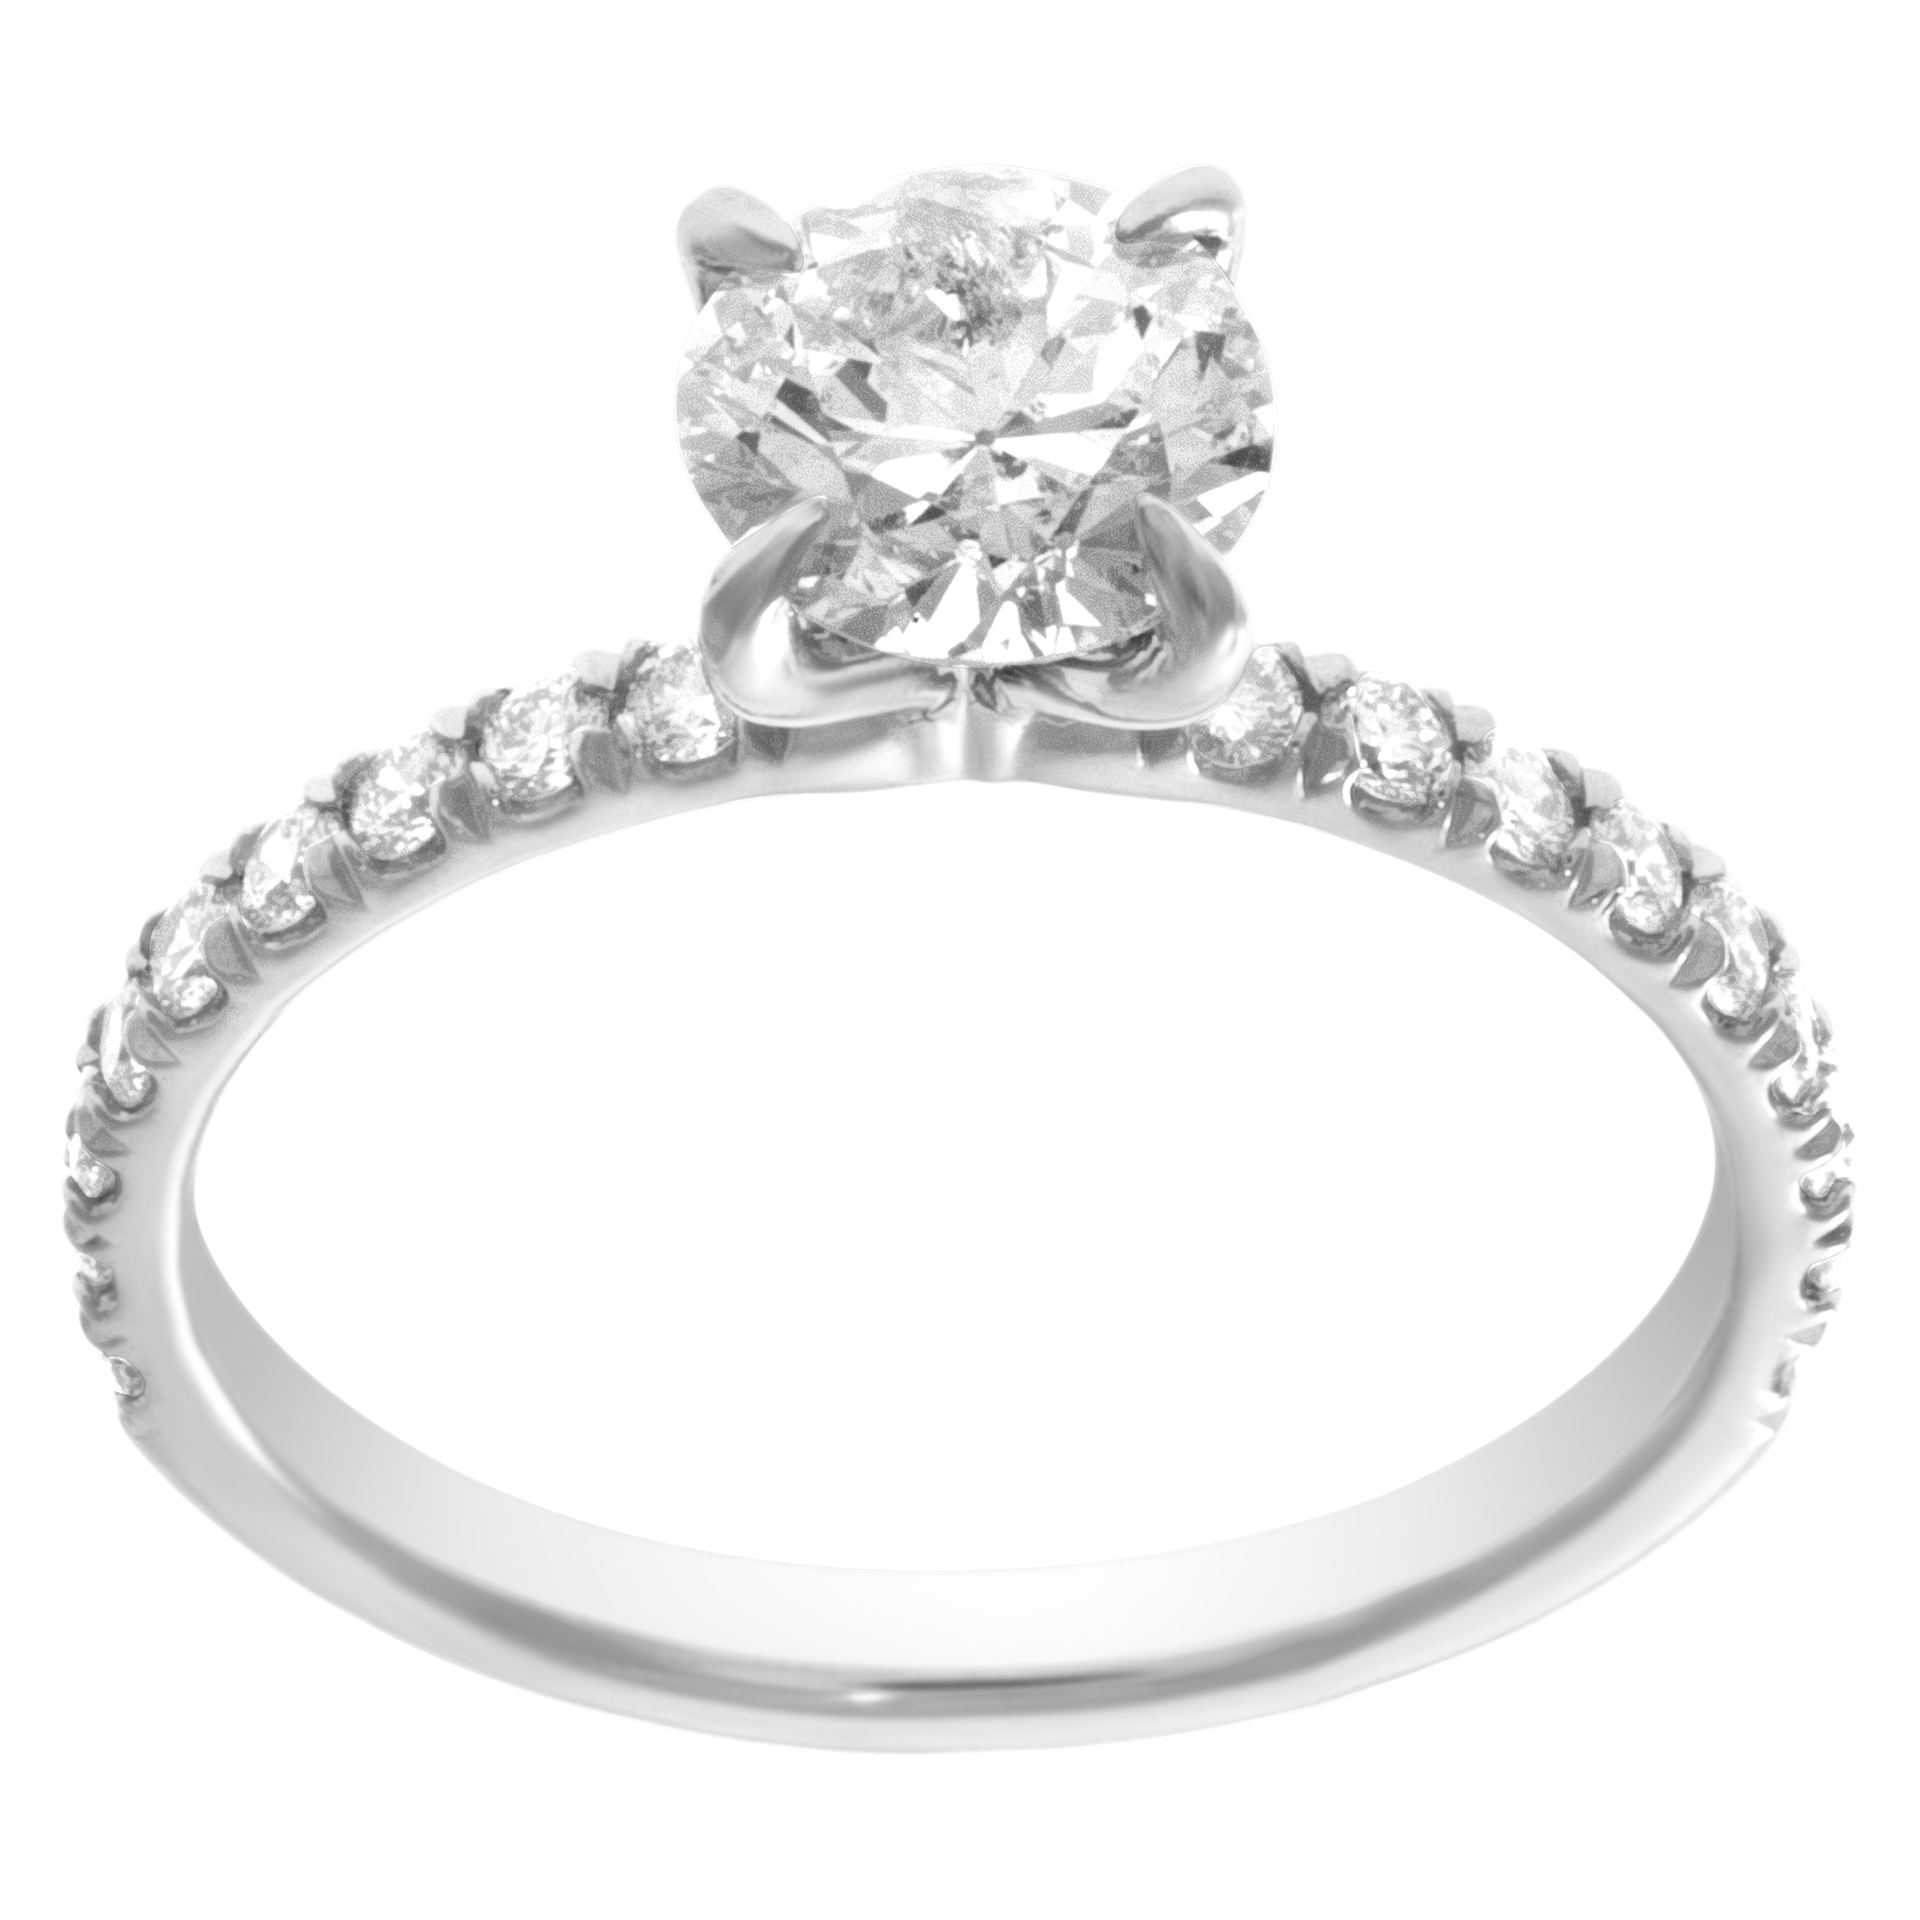 Diamond Eternity Band and Ring GIA certified round circular brilliant diamond 1.07 carat (I color, I2 clarity) set in platinum. Size 7